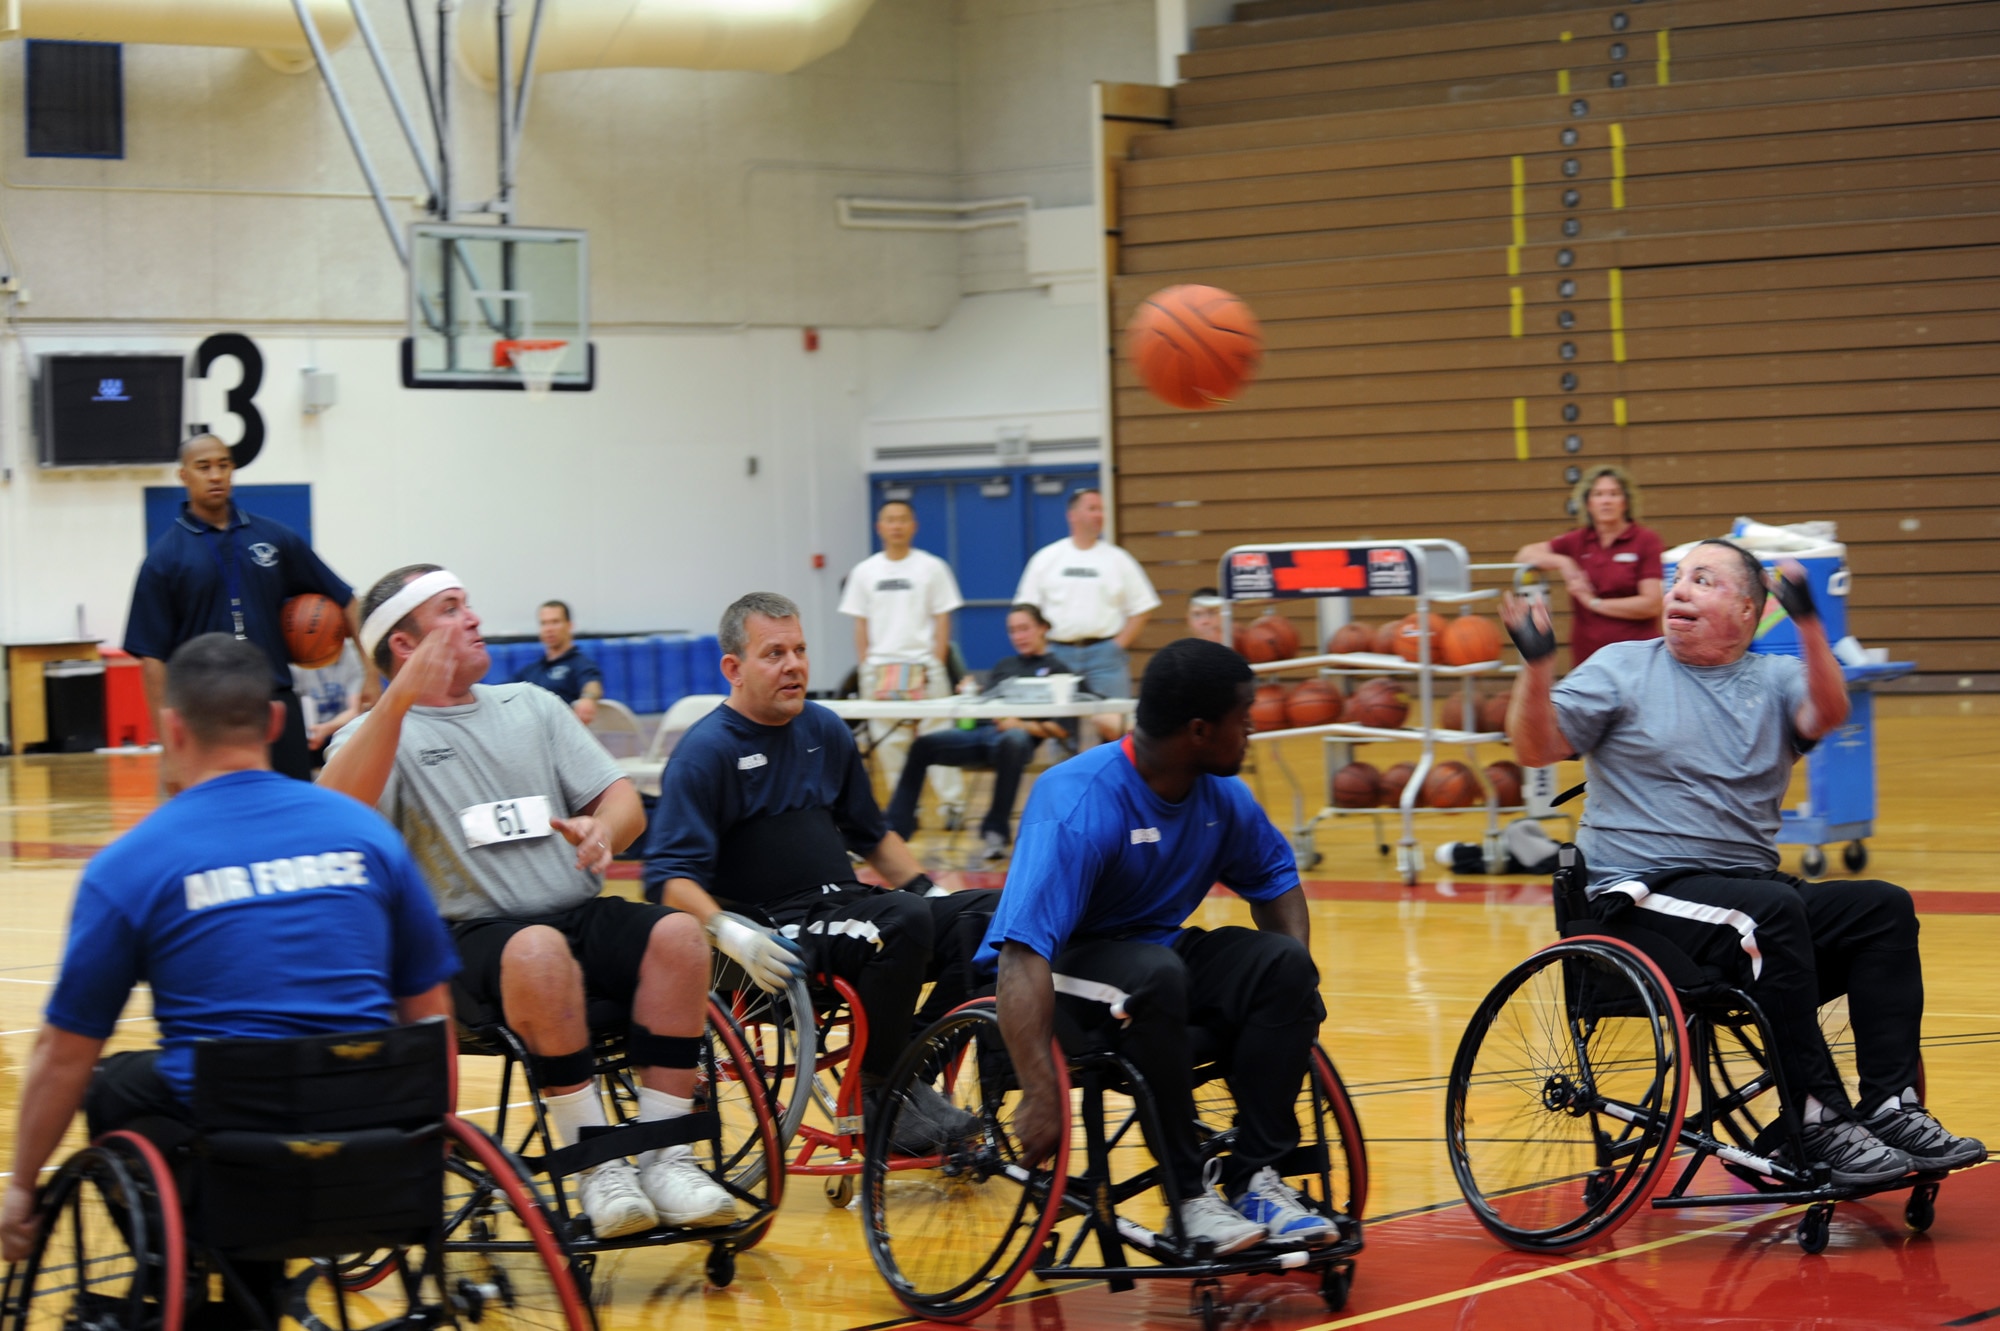 Staff Sgt. Richard Pollock II (second from the left) passes the basketball to Tech. Sgt. Israel Del Toro (right) during practice May 10, 2010, at the Olympic Training Center in Colorado Springs, Colo. Sergeants Pollock and Del Toro are members of the Air Force wheelchair basketball team.  Teams from the Air Force, Army, Navy, Marines and Coast Guard are participating in the inaugural Warrior Games which begin May 10 and finish May 14.  (U.S. Air Force photo/Staff Sgt. Desiree N. Palacios)